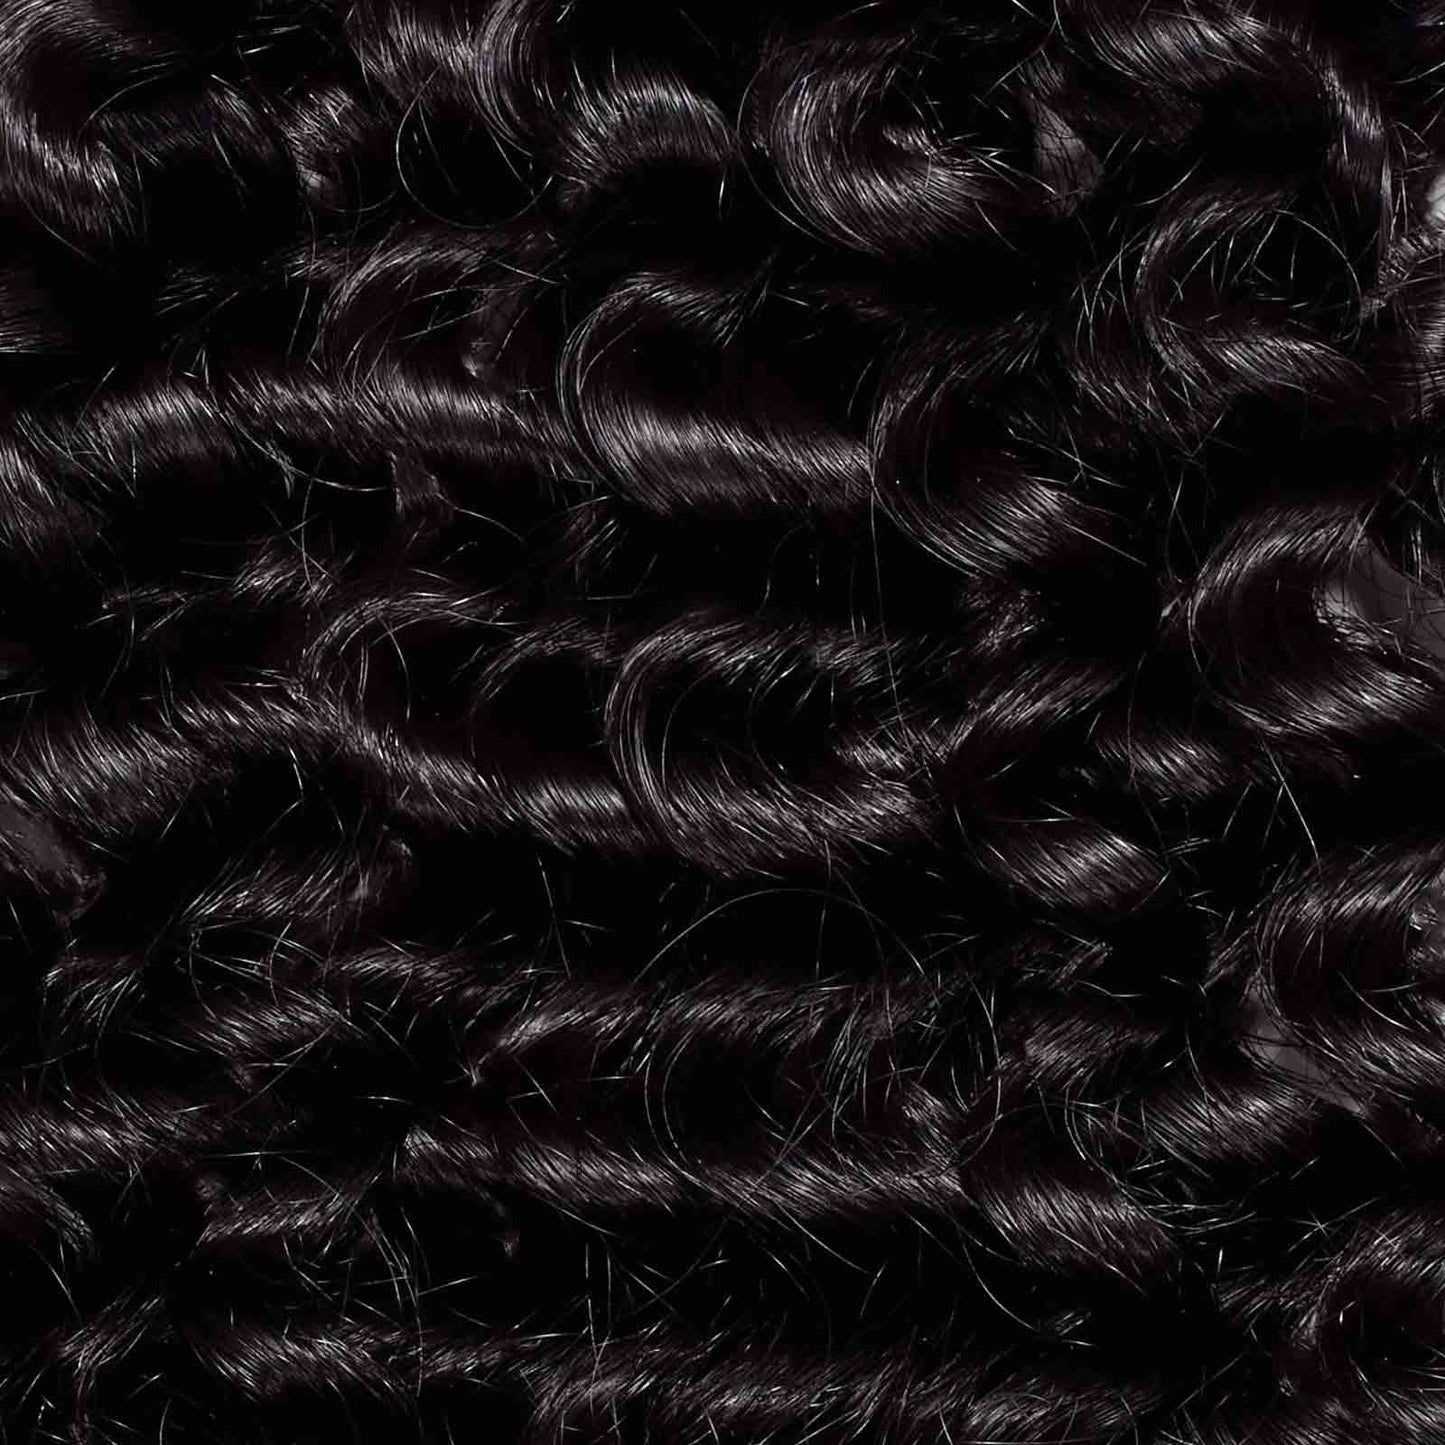 3 x Tight Curly Machine Weft Bundle Deal